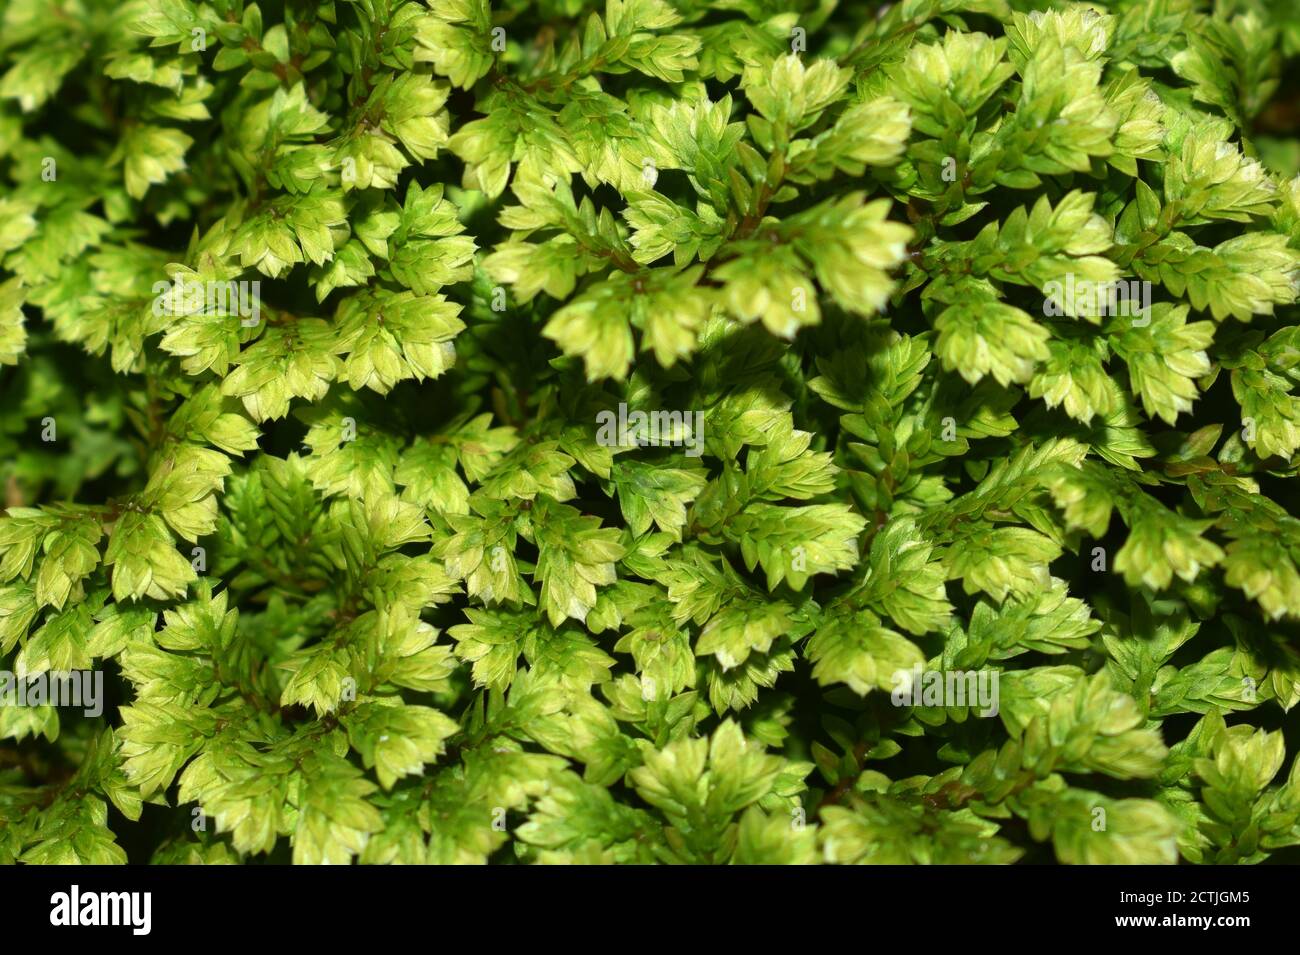 Liverwort Picture taken at Icchegaon, Kalimpong, West Bengal, India Stock Photo